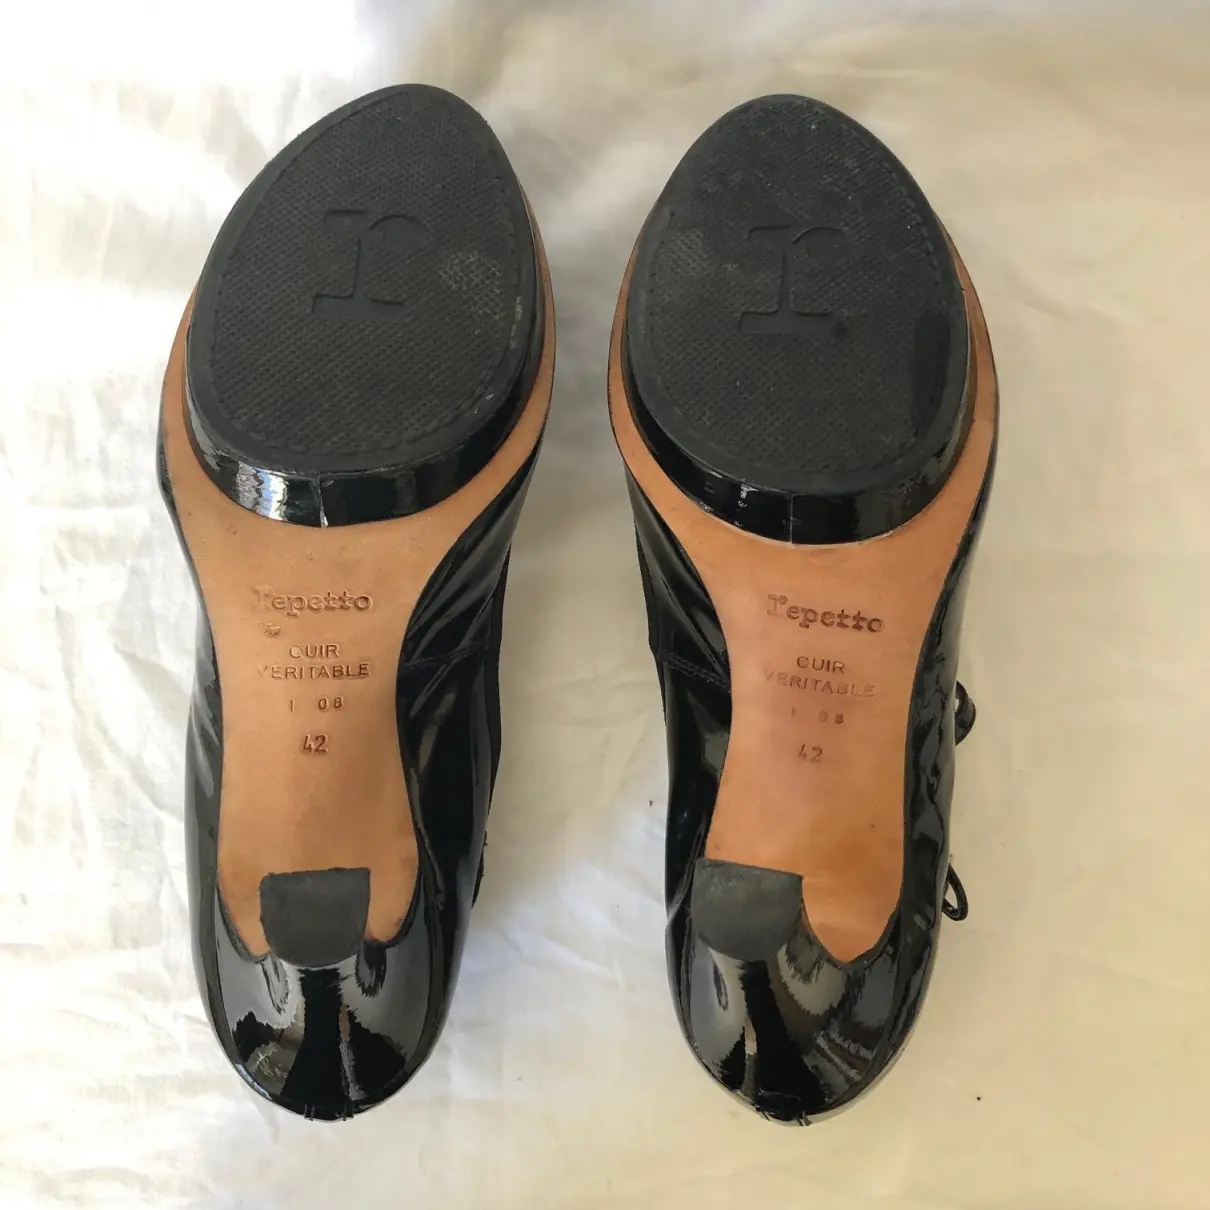 Patent leather heels Repetto